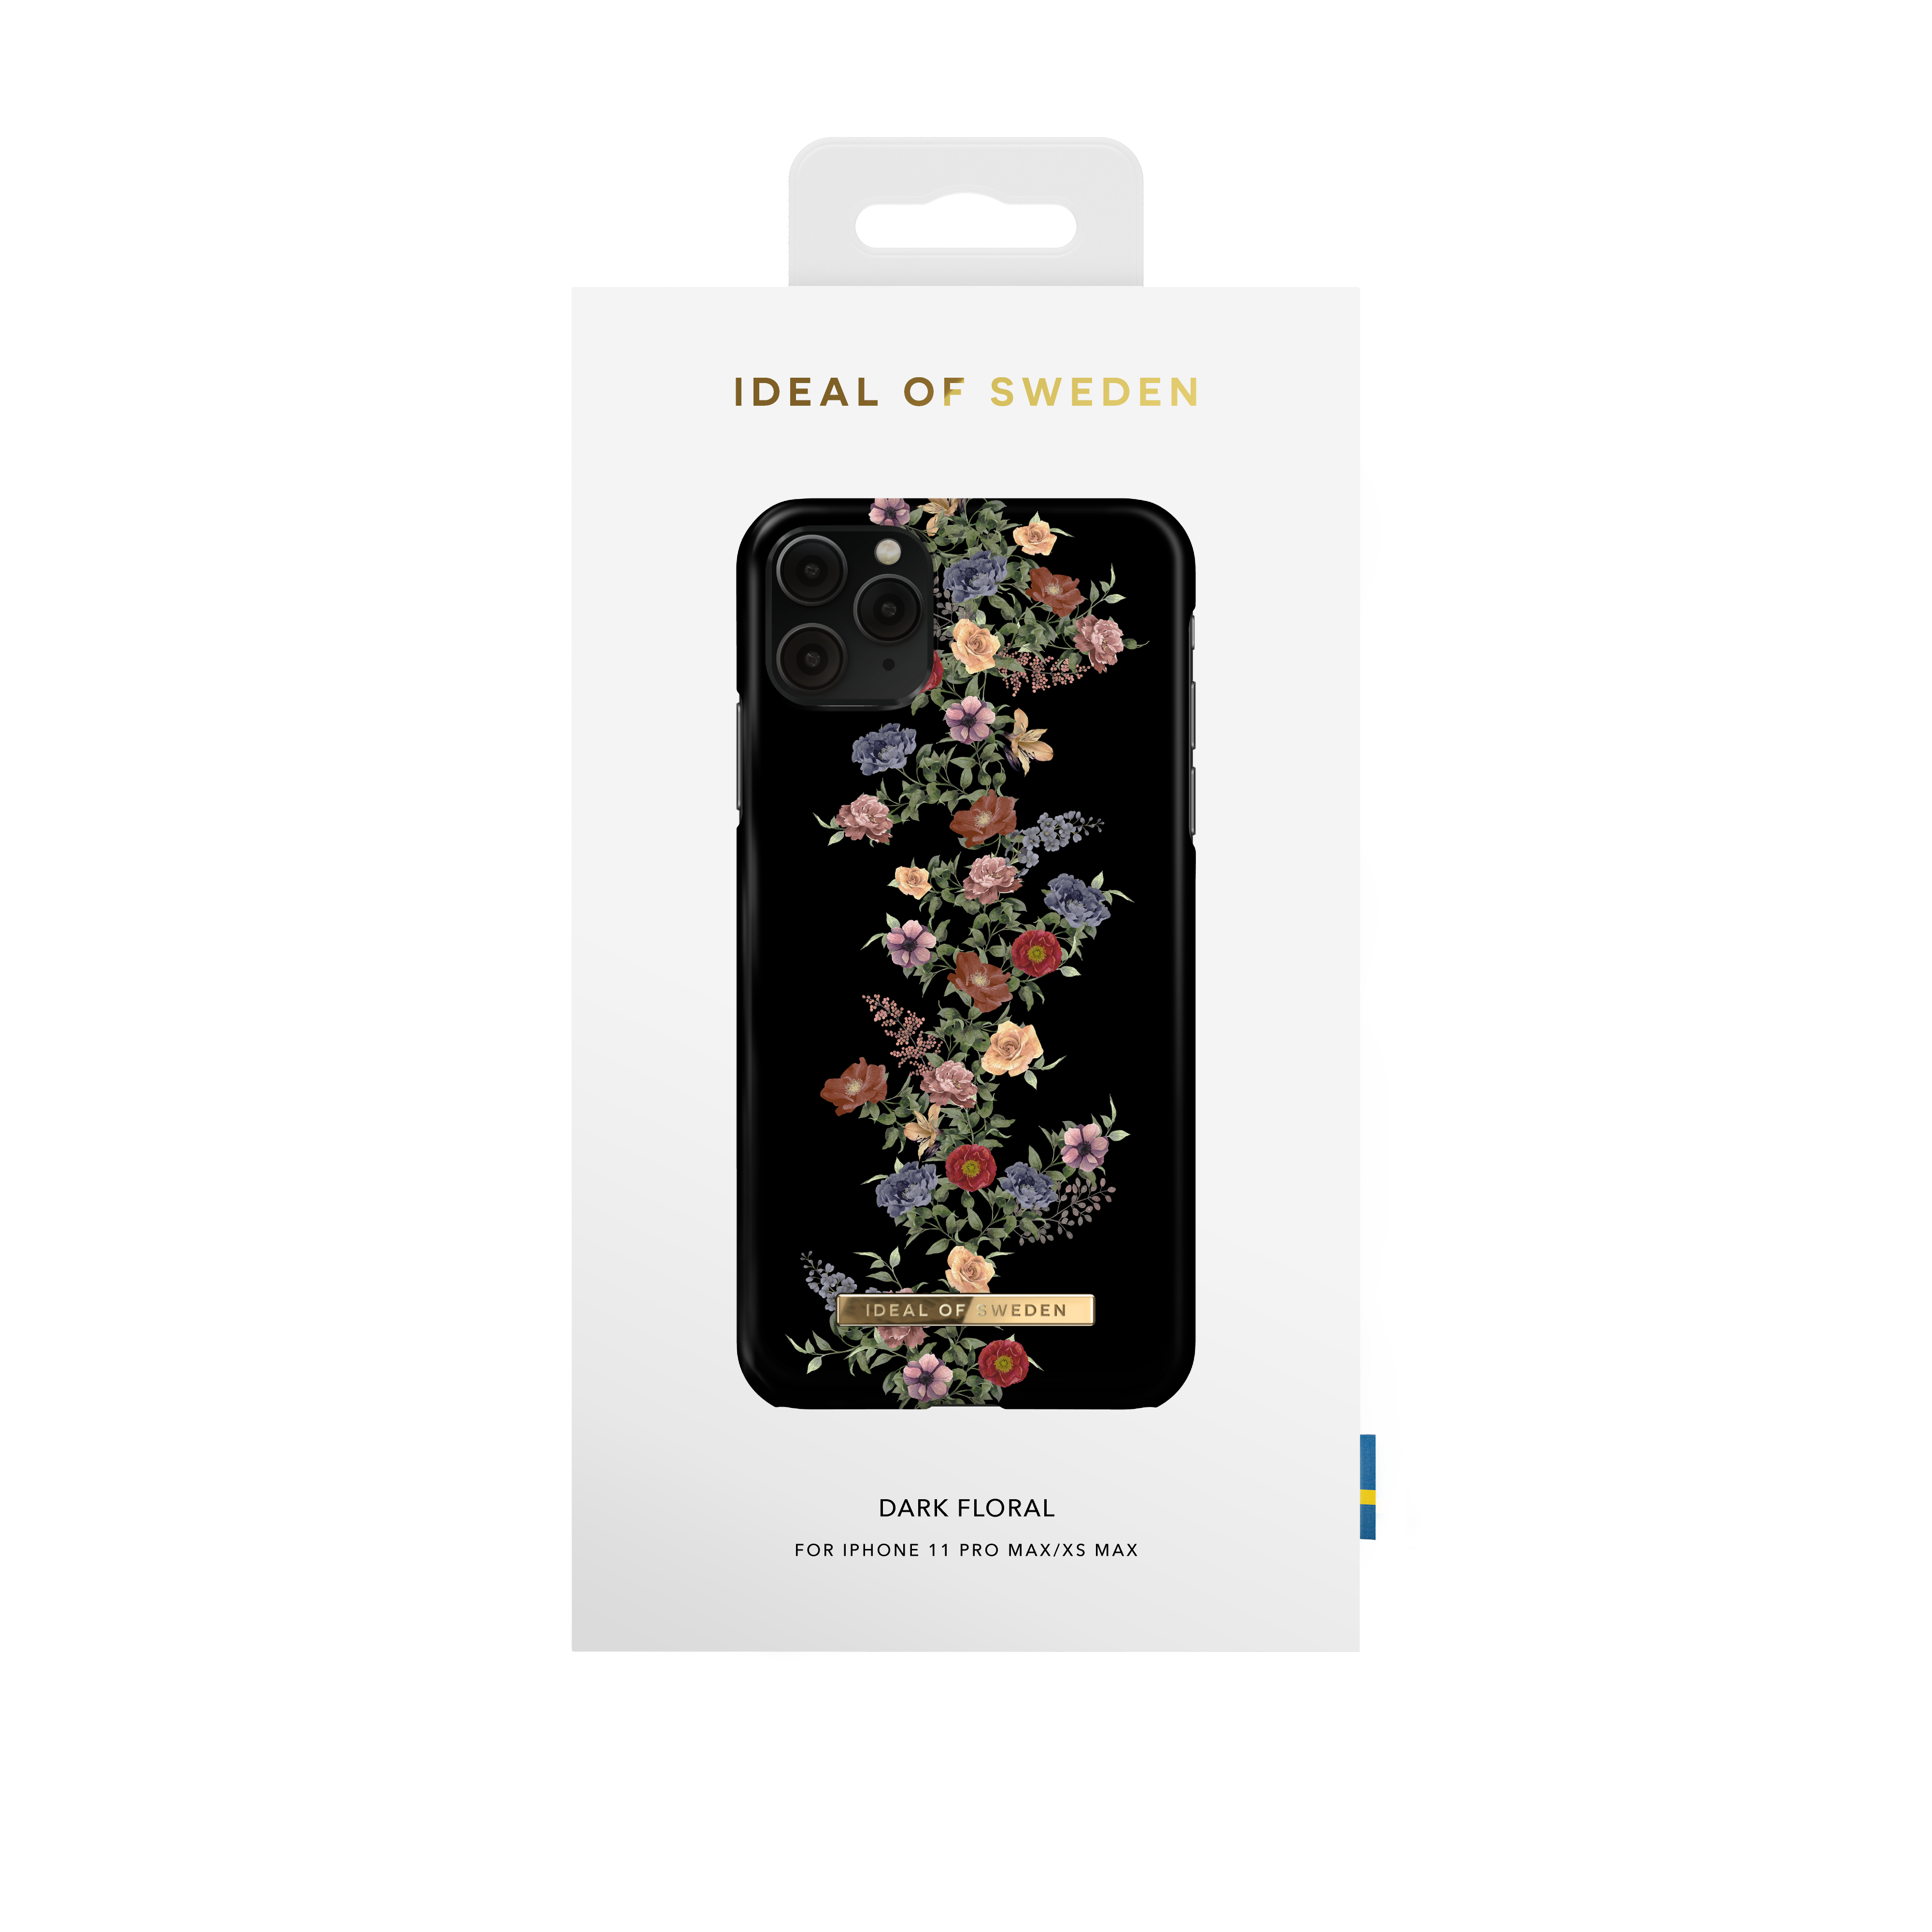 11 Apple, Dark iPhone XS IDFCAW18-I1965-97, Backcover, iPhone Max, Max, SWEDEN Pro OF IDEAL Floral